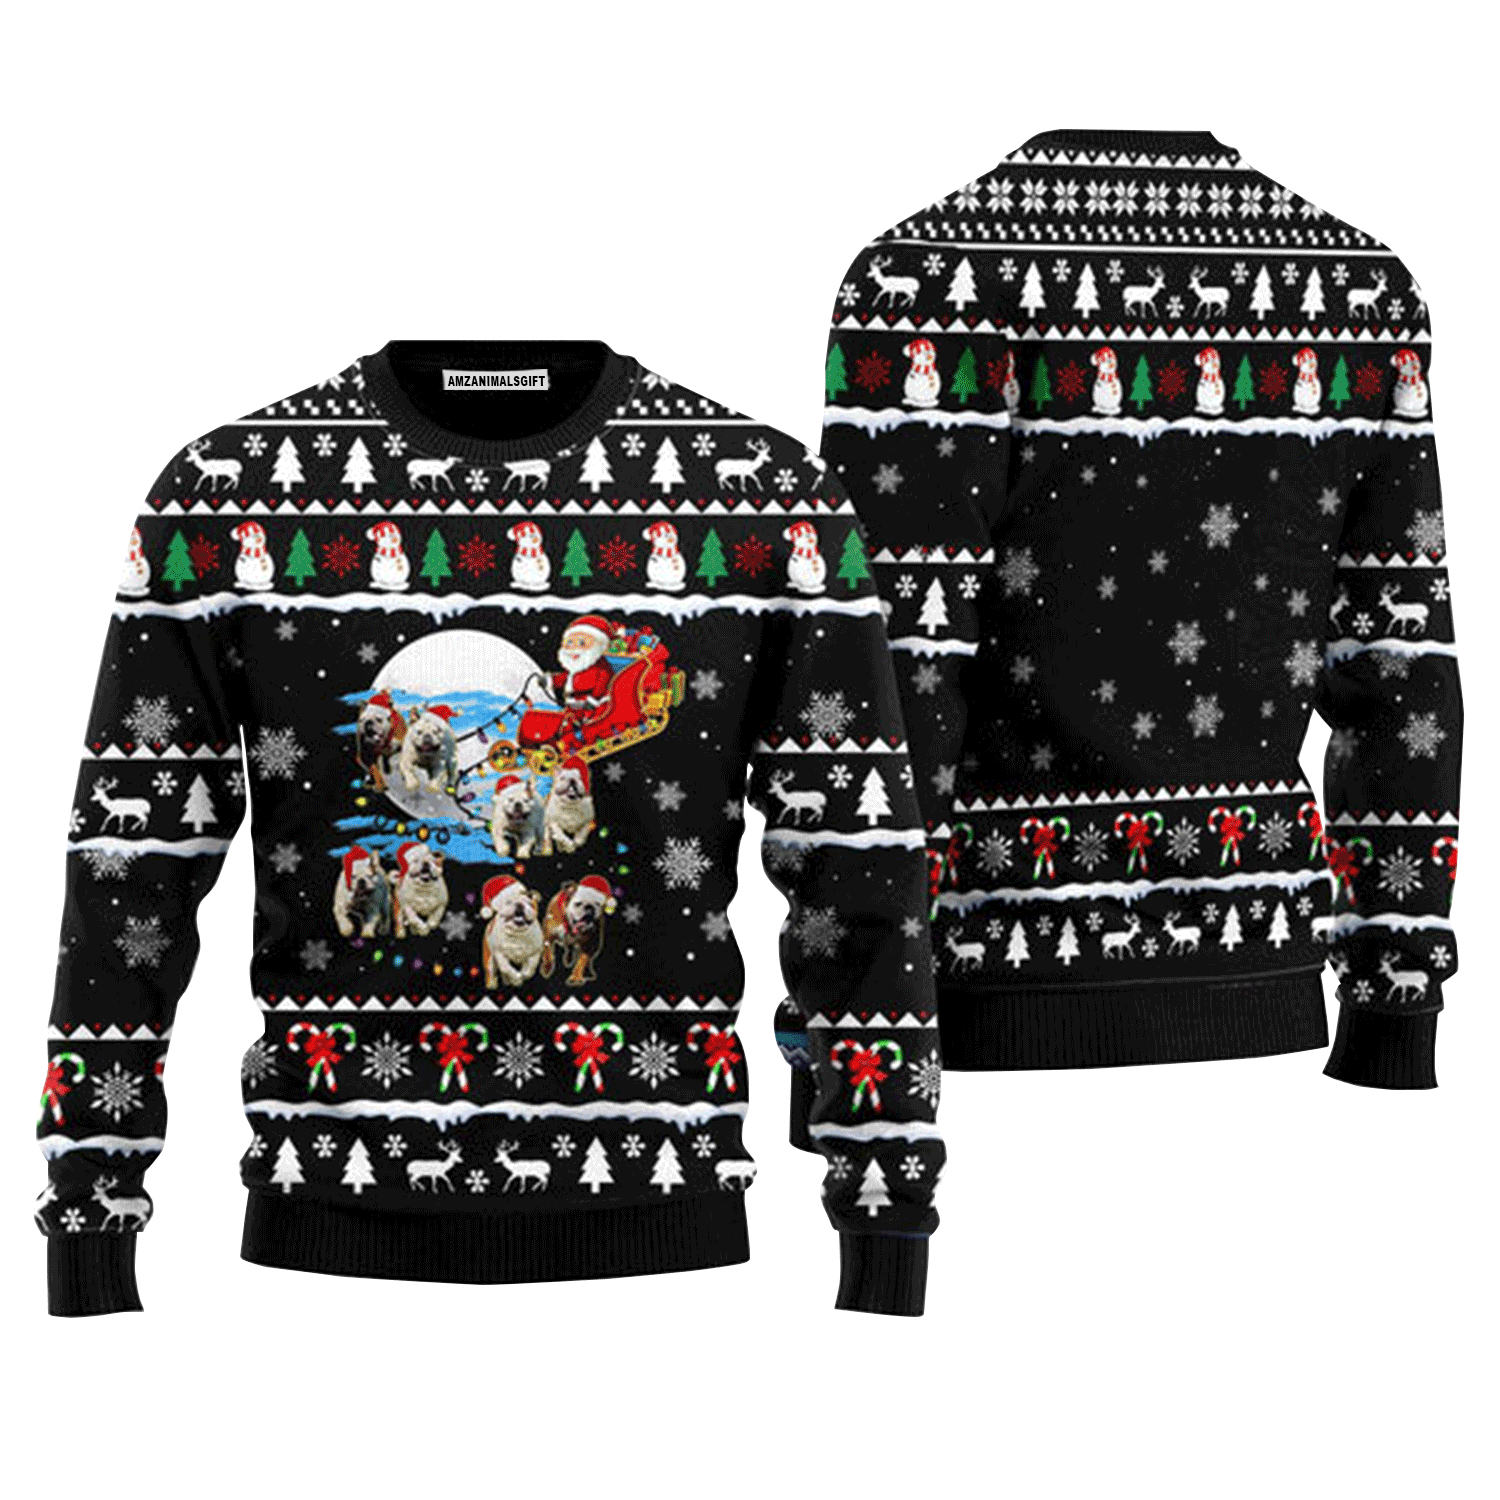 Bulldog Sweater Santa On Highway, Ugly Christmas Sweater For Men & Women, Perfect Outfit For Christmas New Year Autumn Winter